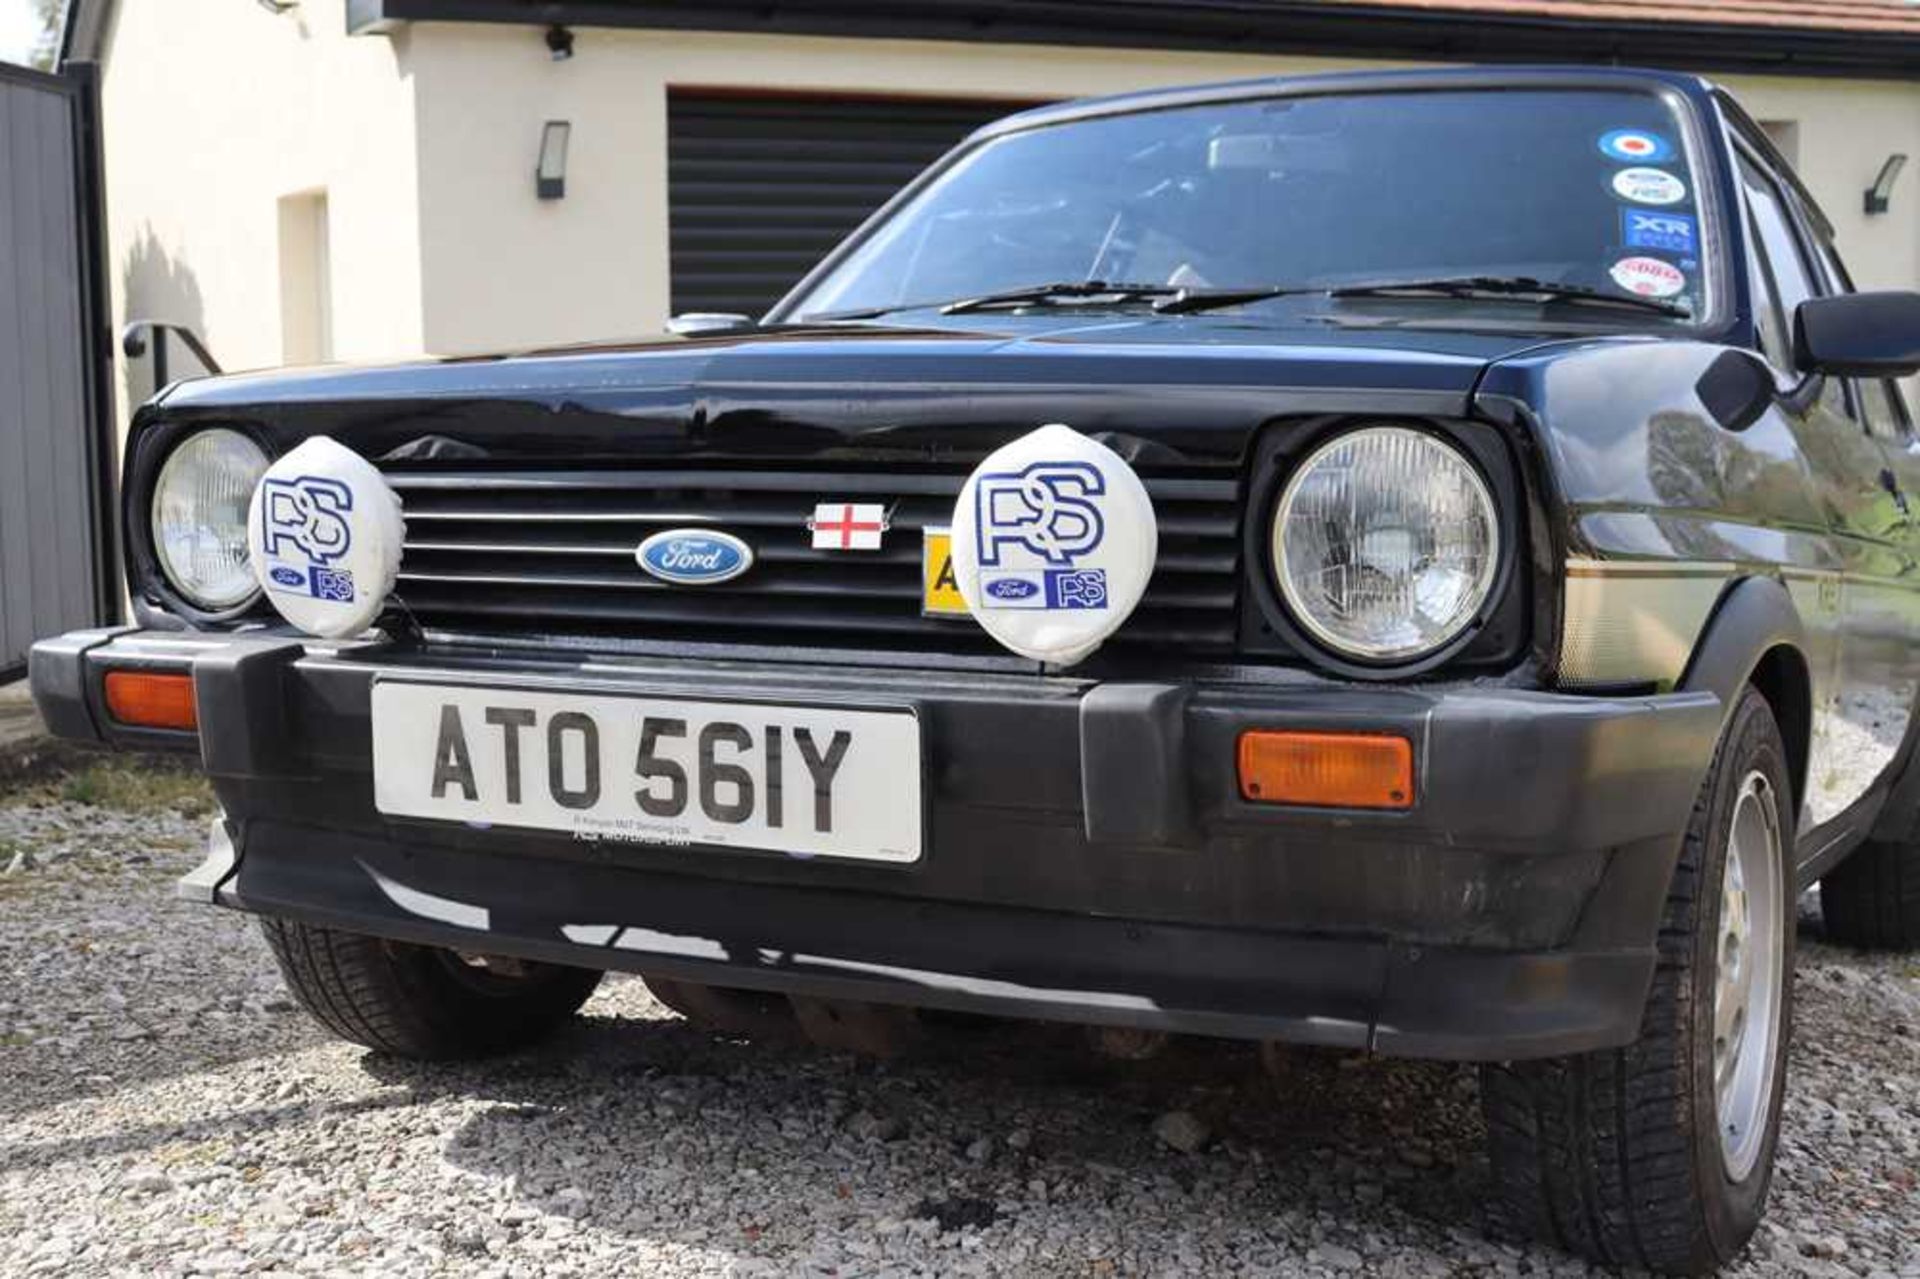 1983 Ford Fiesta XR2 - Image 32 of 56